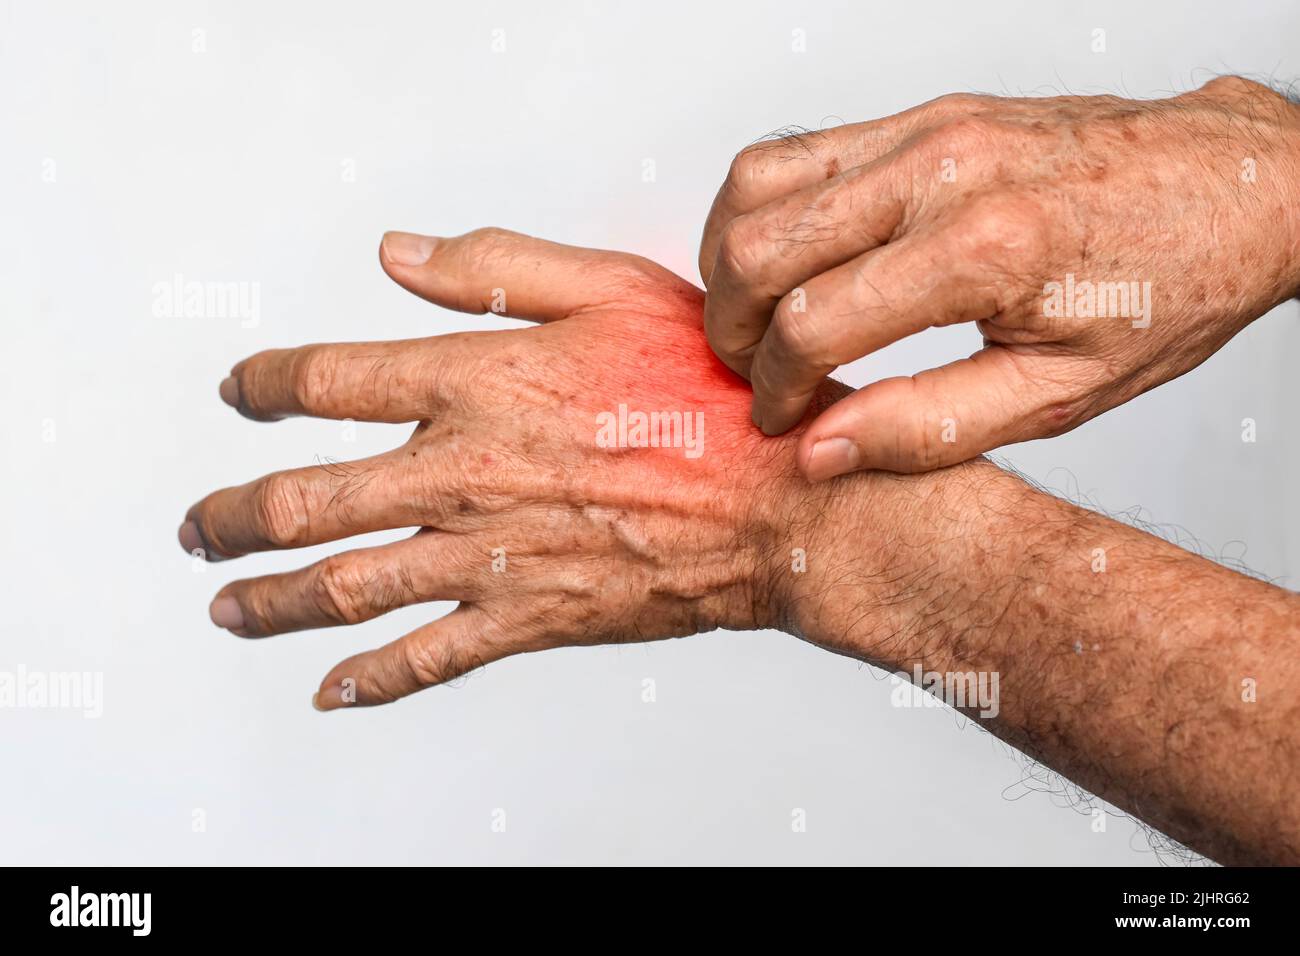 Asian elder man scratching his hand. Concept of itchy skin diseases such as scabies, fungal infection, eczema, psoriasis, allergy, etc. Stock Photo